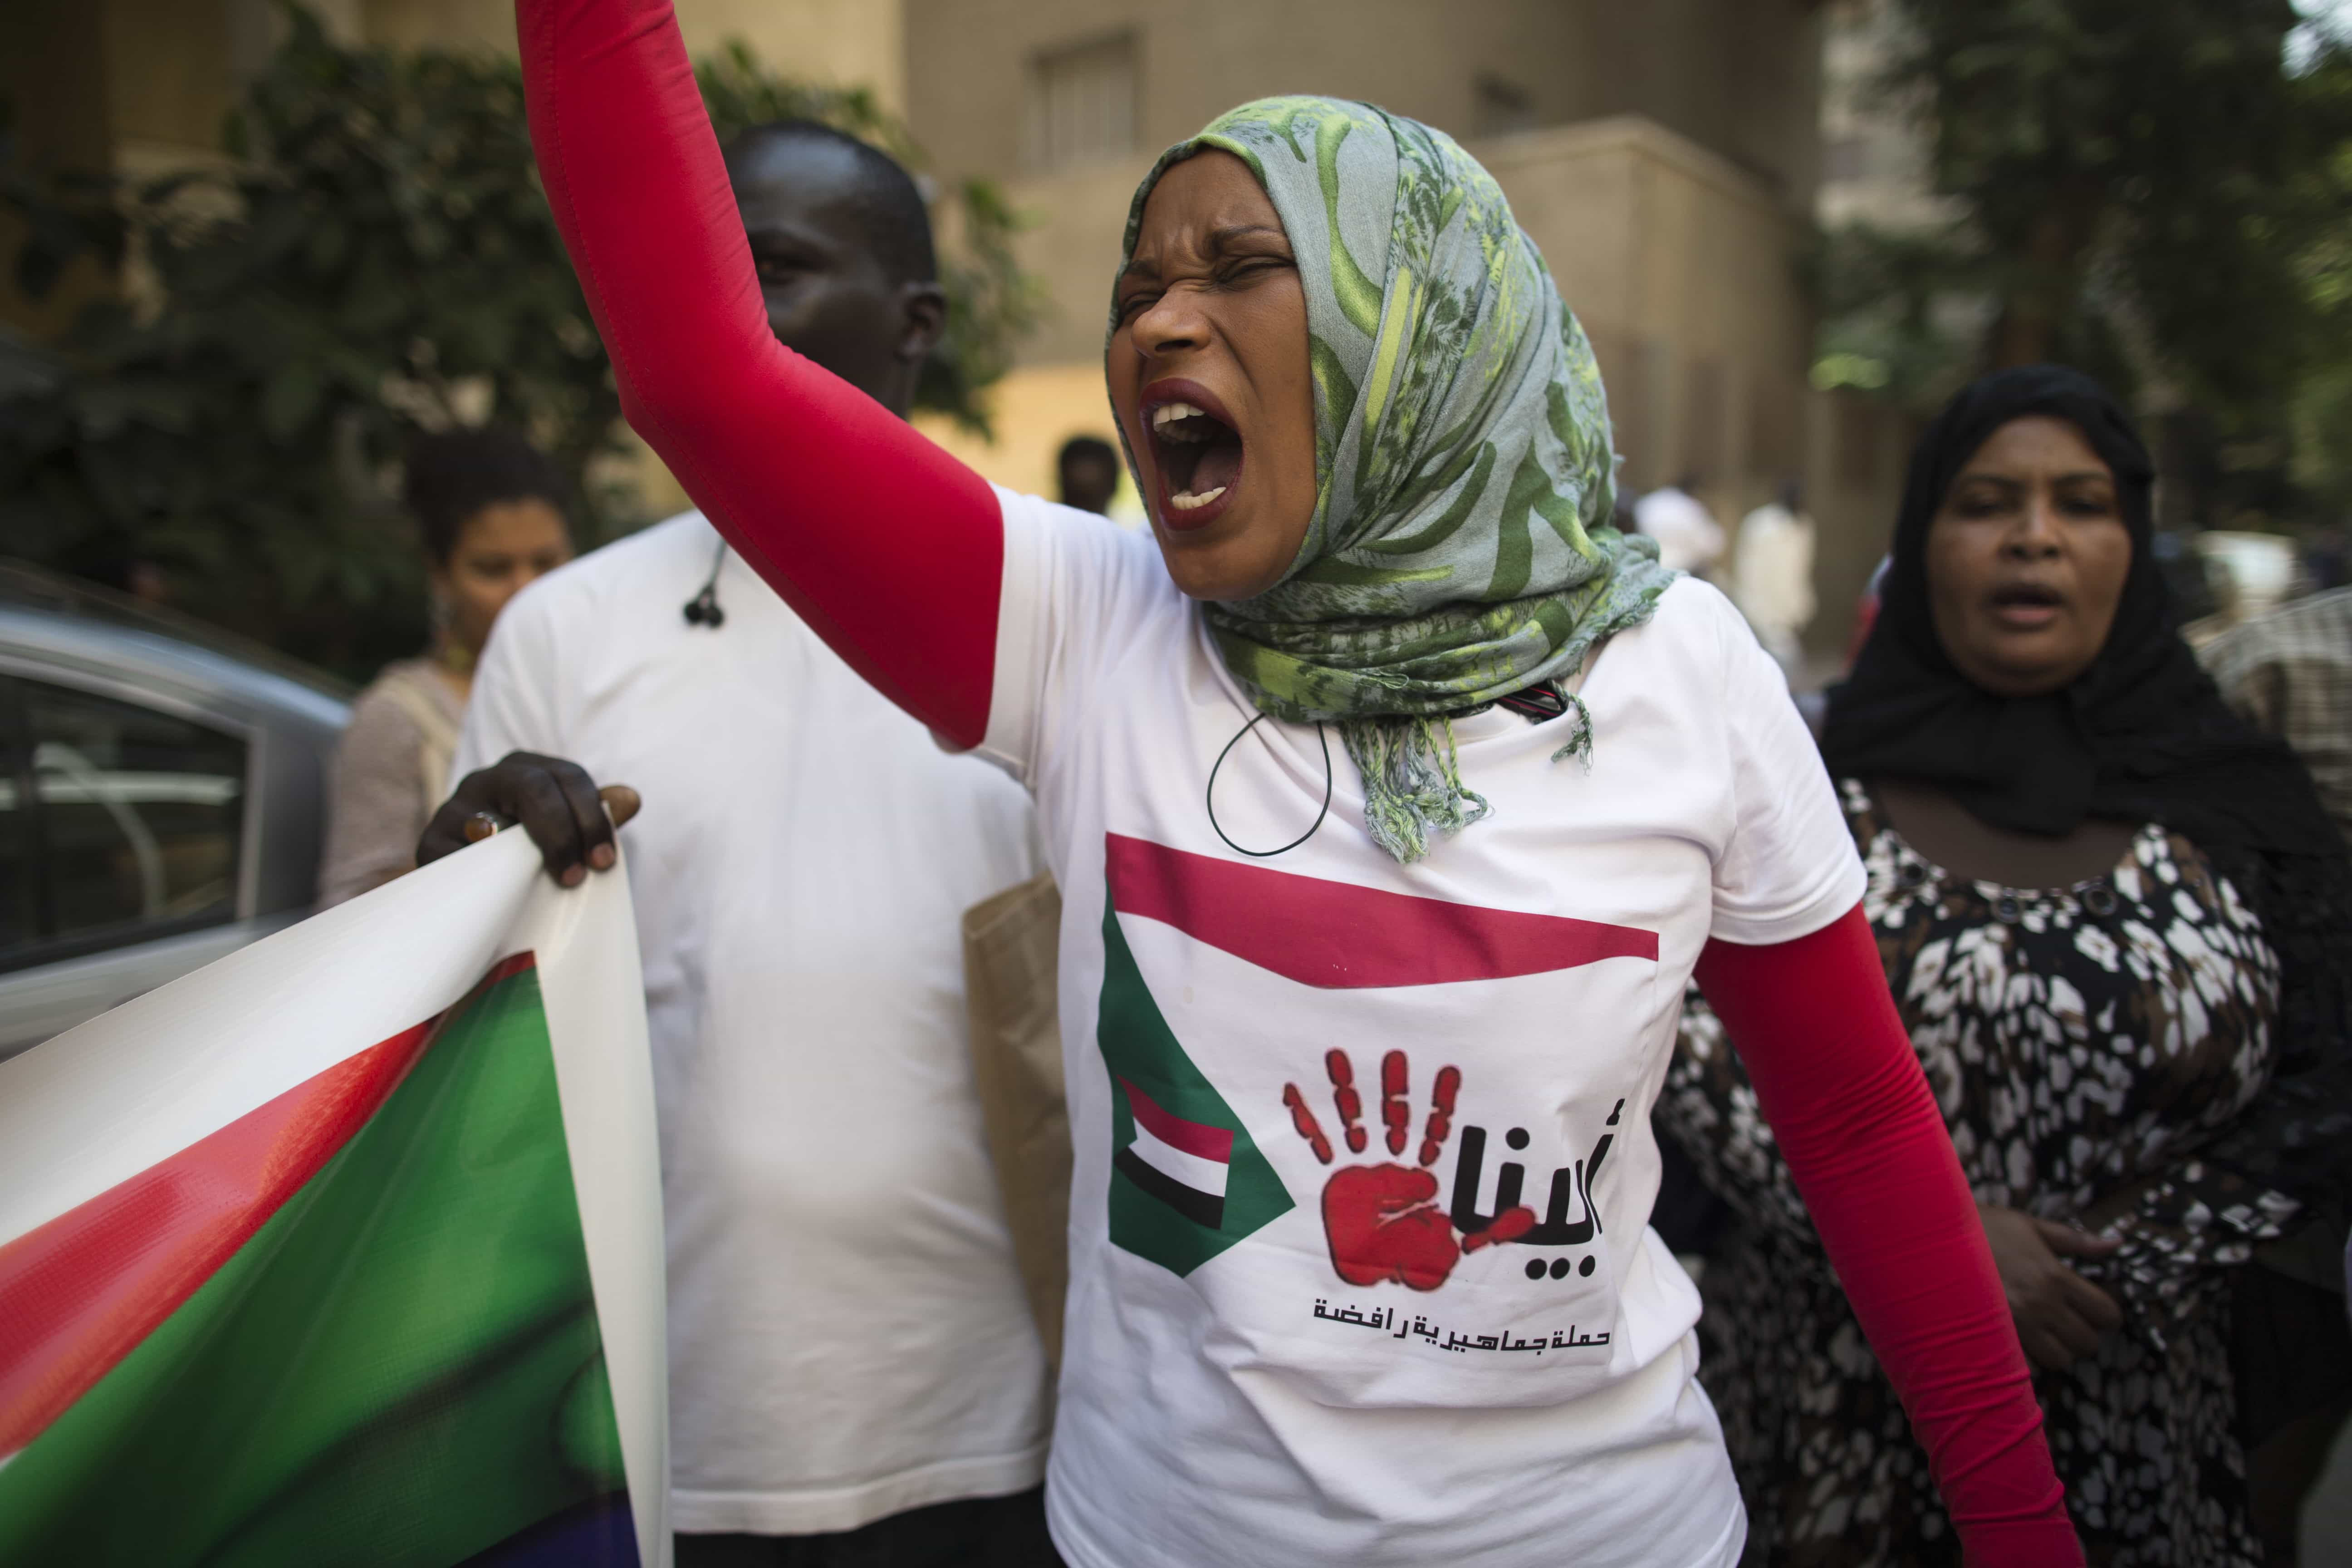 A Sudanese woman chants slogans against longtime President Omar al-Bashir during a protest in front of the Sudanese embassy in Cairo, Egypt, Sunday, Sept. 29, 2013., AP Photo/Hassan Ammar